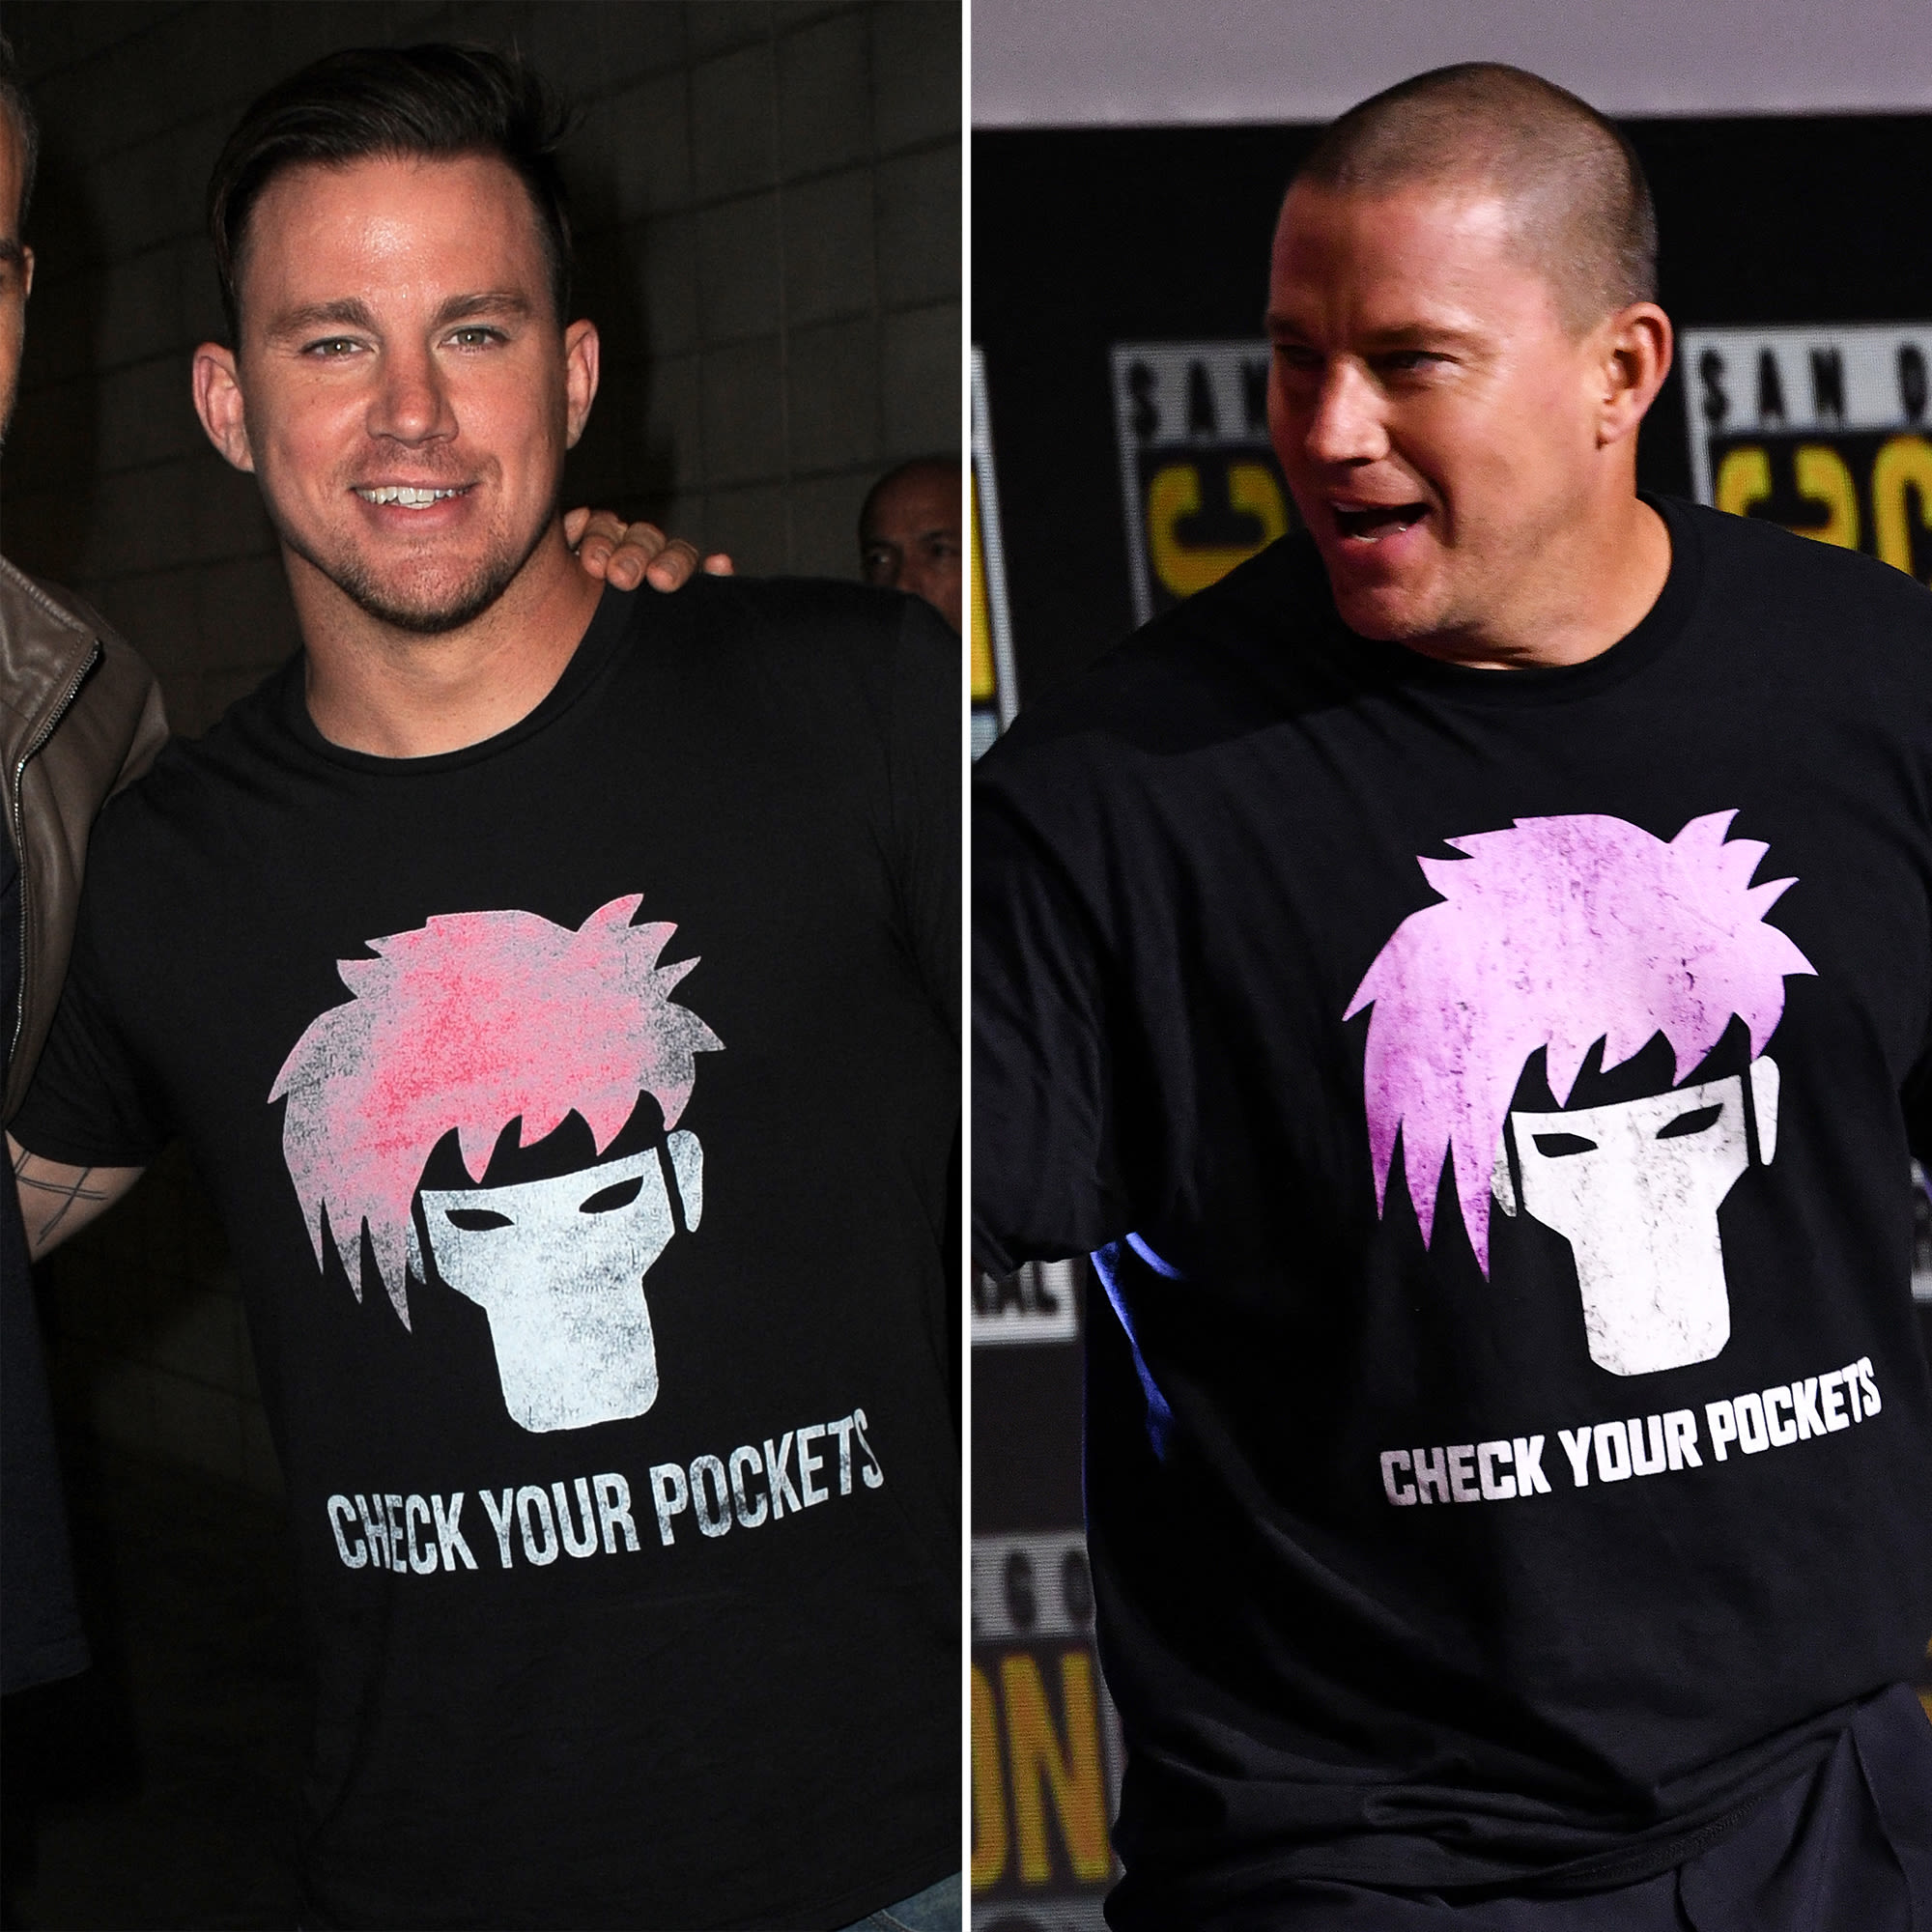 Channing Tatum Rewears Faded Gambit T-Shirt at San Diego Comic-Con Shouting Out Aborted X-Men Project